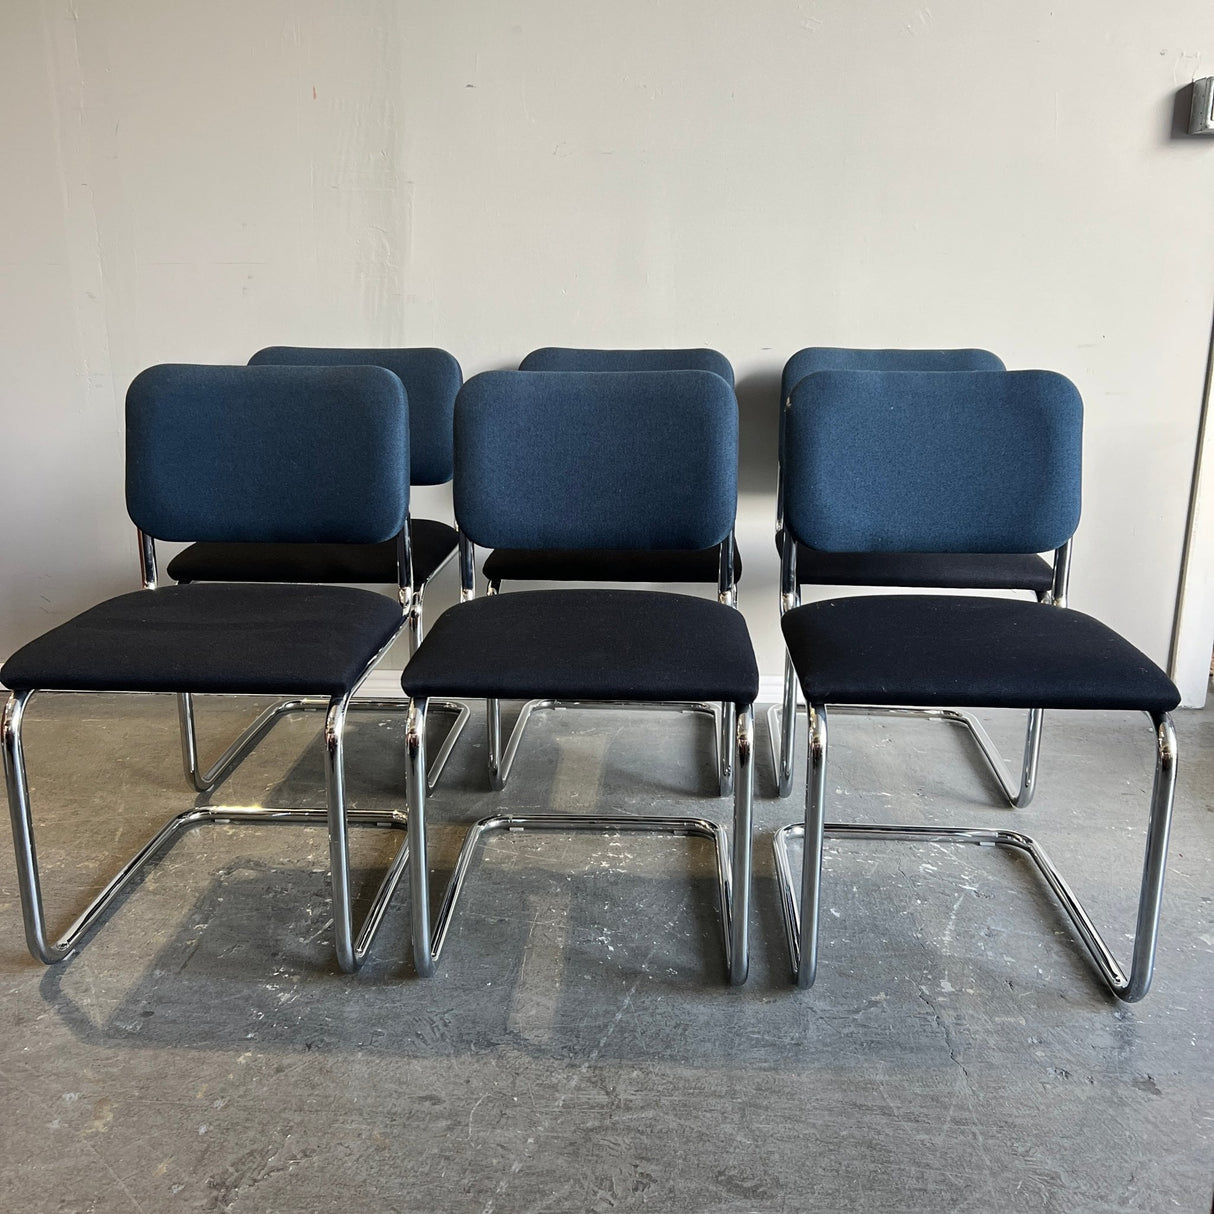 New! Authentic Knoll Marcel Breuer set of 6 Cesca chairs - enliven mart